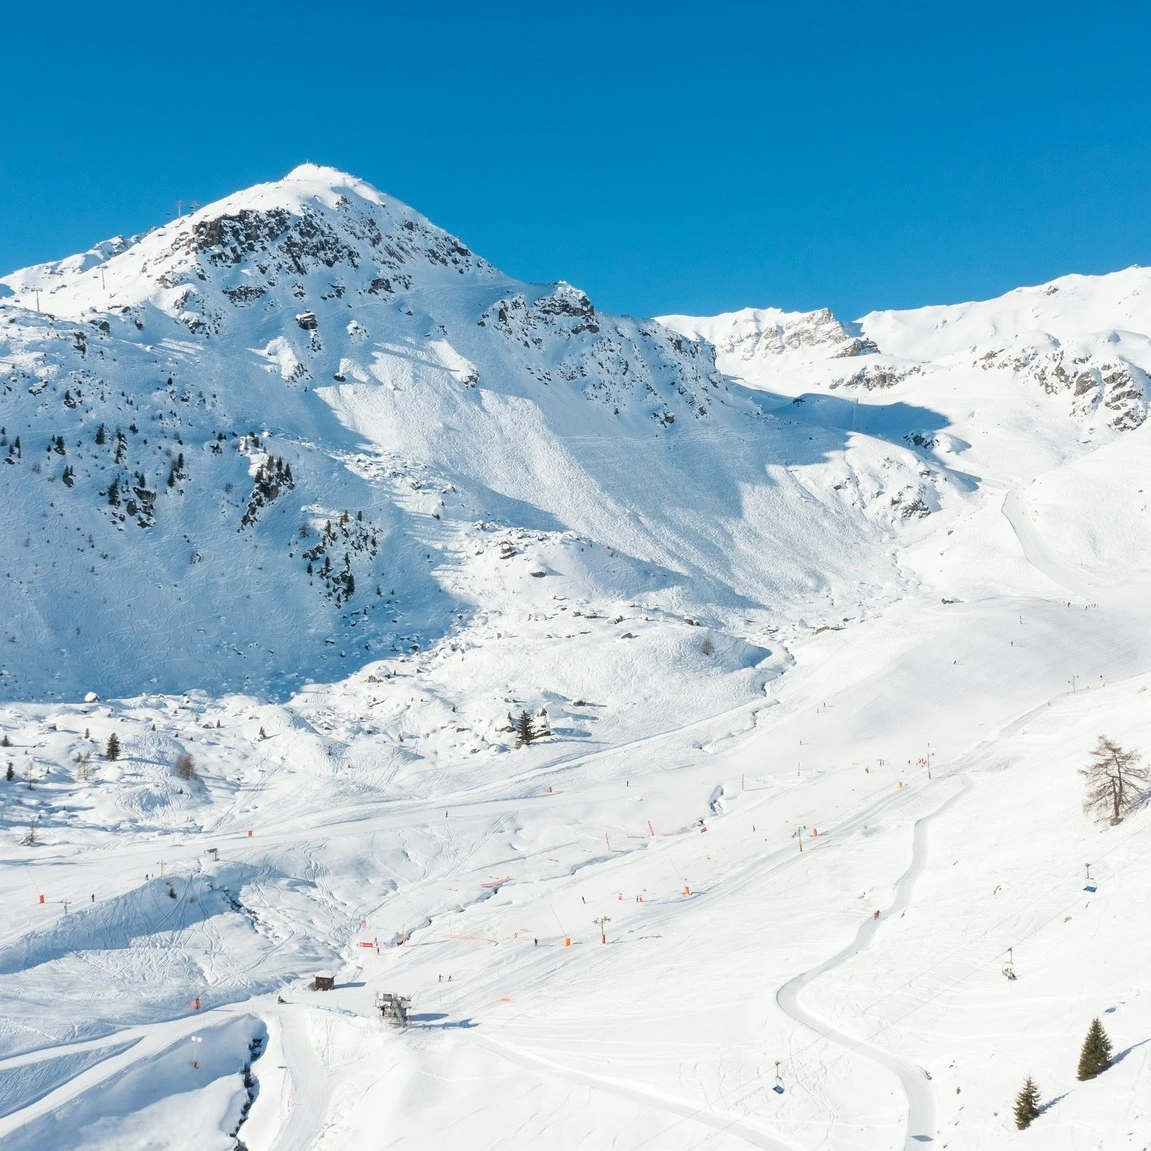 a white ski area, pistes looking beautiful, with tracks all over the off-piste terrain